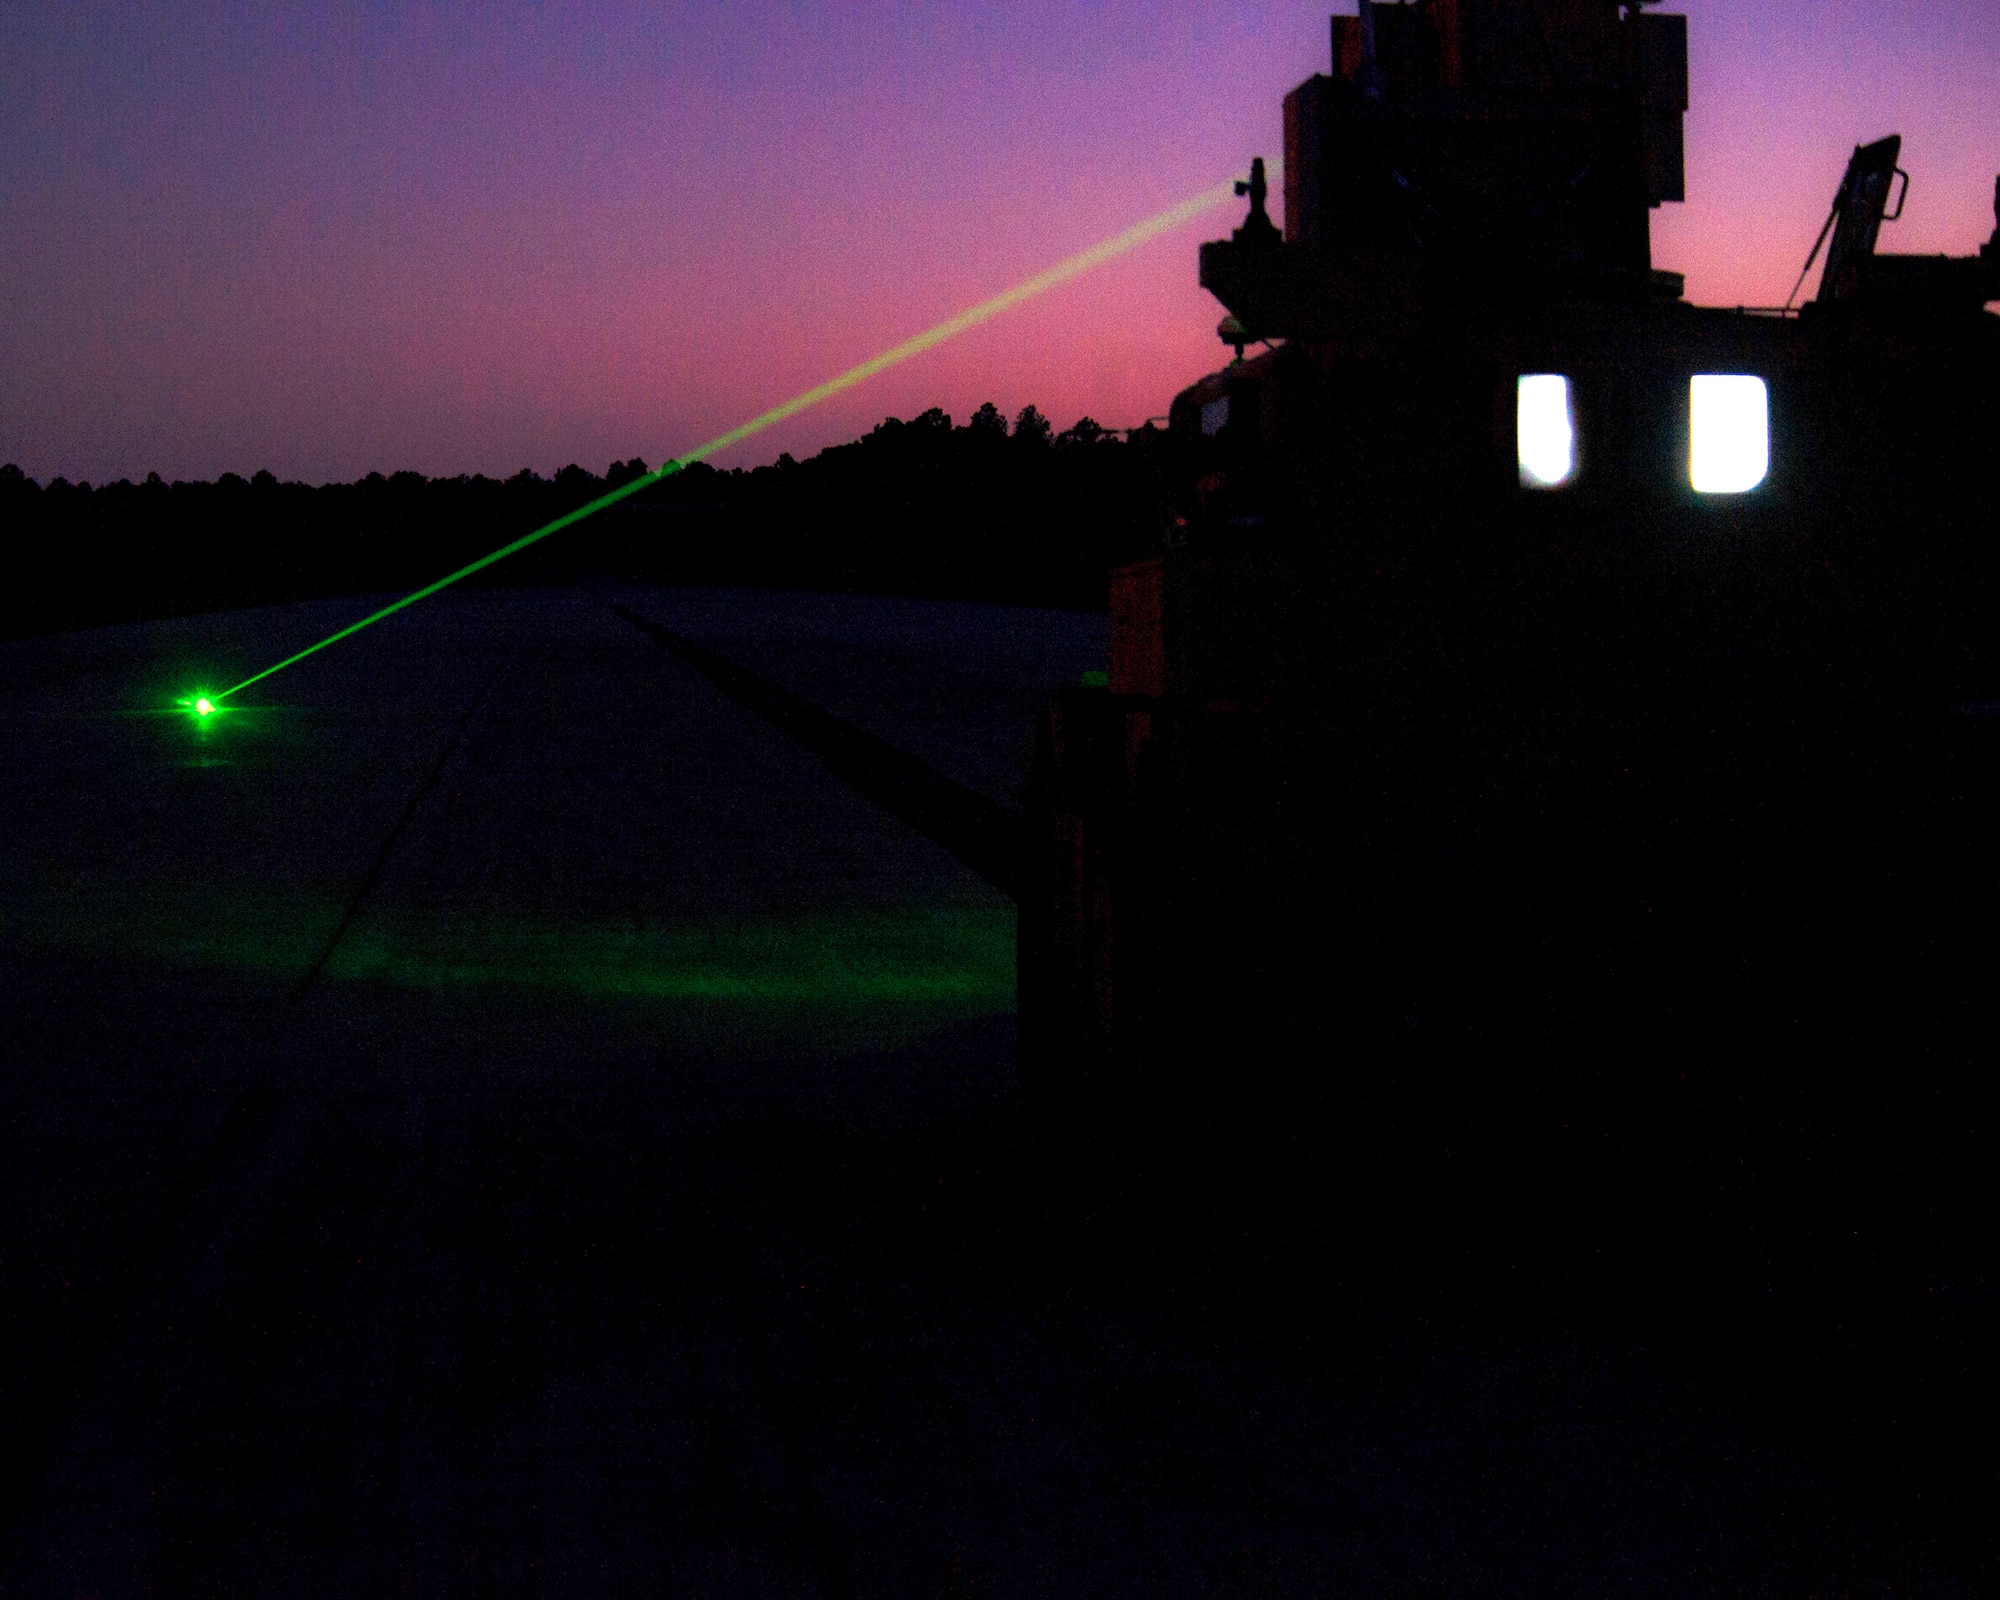 This week’s Squadron of the Week is Tyndall’s Air Force Civil Engineer Center. An airfield explosive ordnance removal vehicle tests its laser during a demonstration at Tyndall’s Silver Flag site, Dec 8.  The vehicle uses a laser to detonate unexploded ordnance on airfields. It is a safer way of disposing hostile bombs when compared to conventional methods.  Developing systems like this is part of the Air Force Civil Engineer Center’s mission. Other mission sets include facility investment planning, design and construction, operations support, real property management, readiness, energy support, environmental compliance and restoration, and audit assertions, acquisition and program management. (U.S. Air Force photo by Senior Airman Solomon Cook/Released)